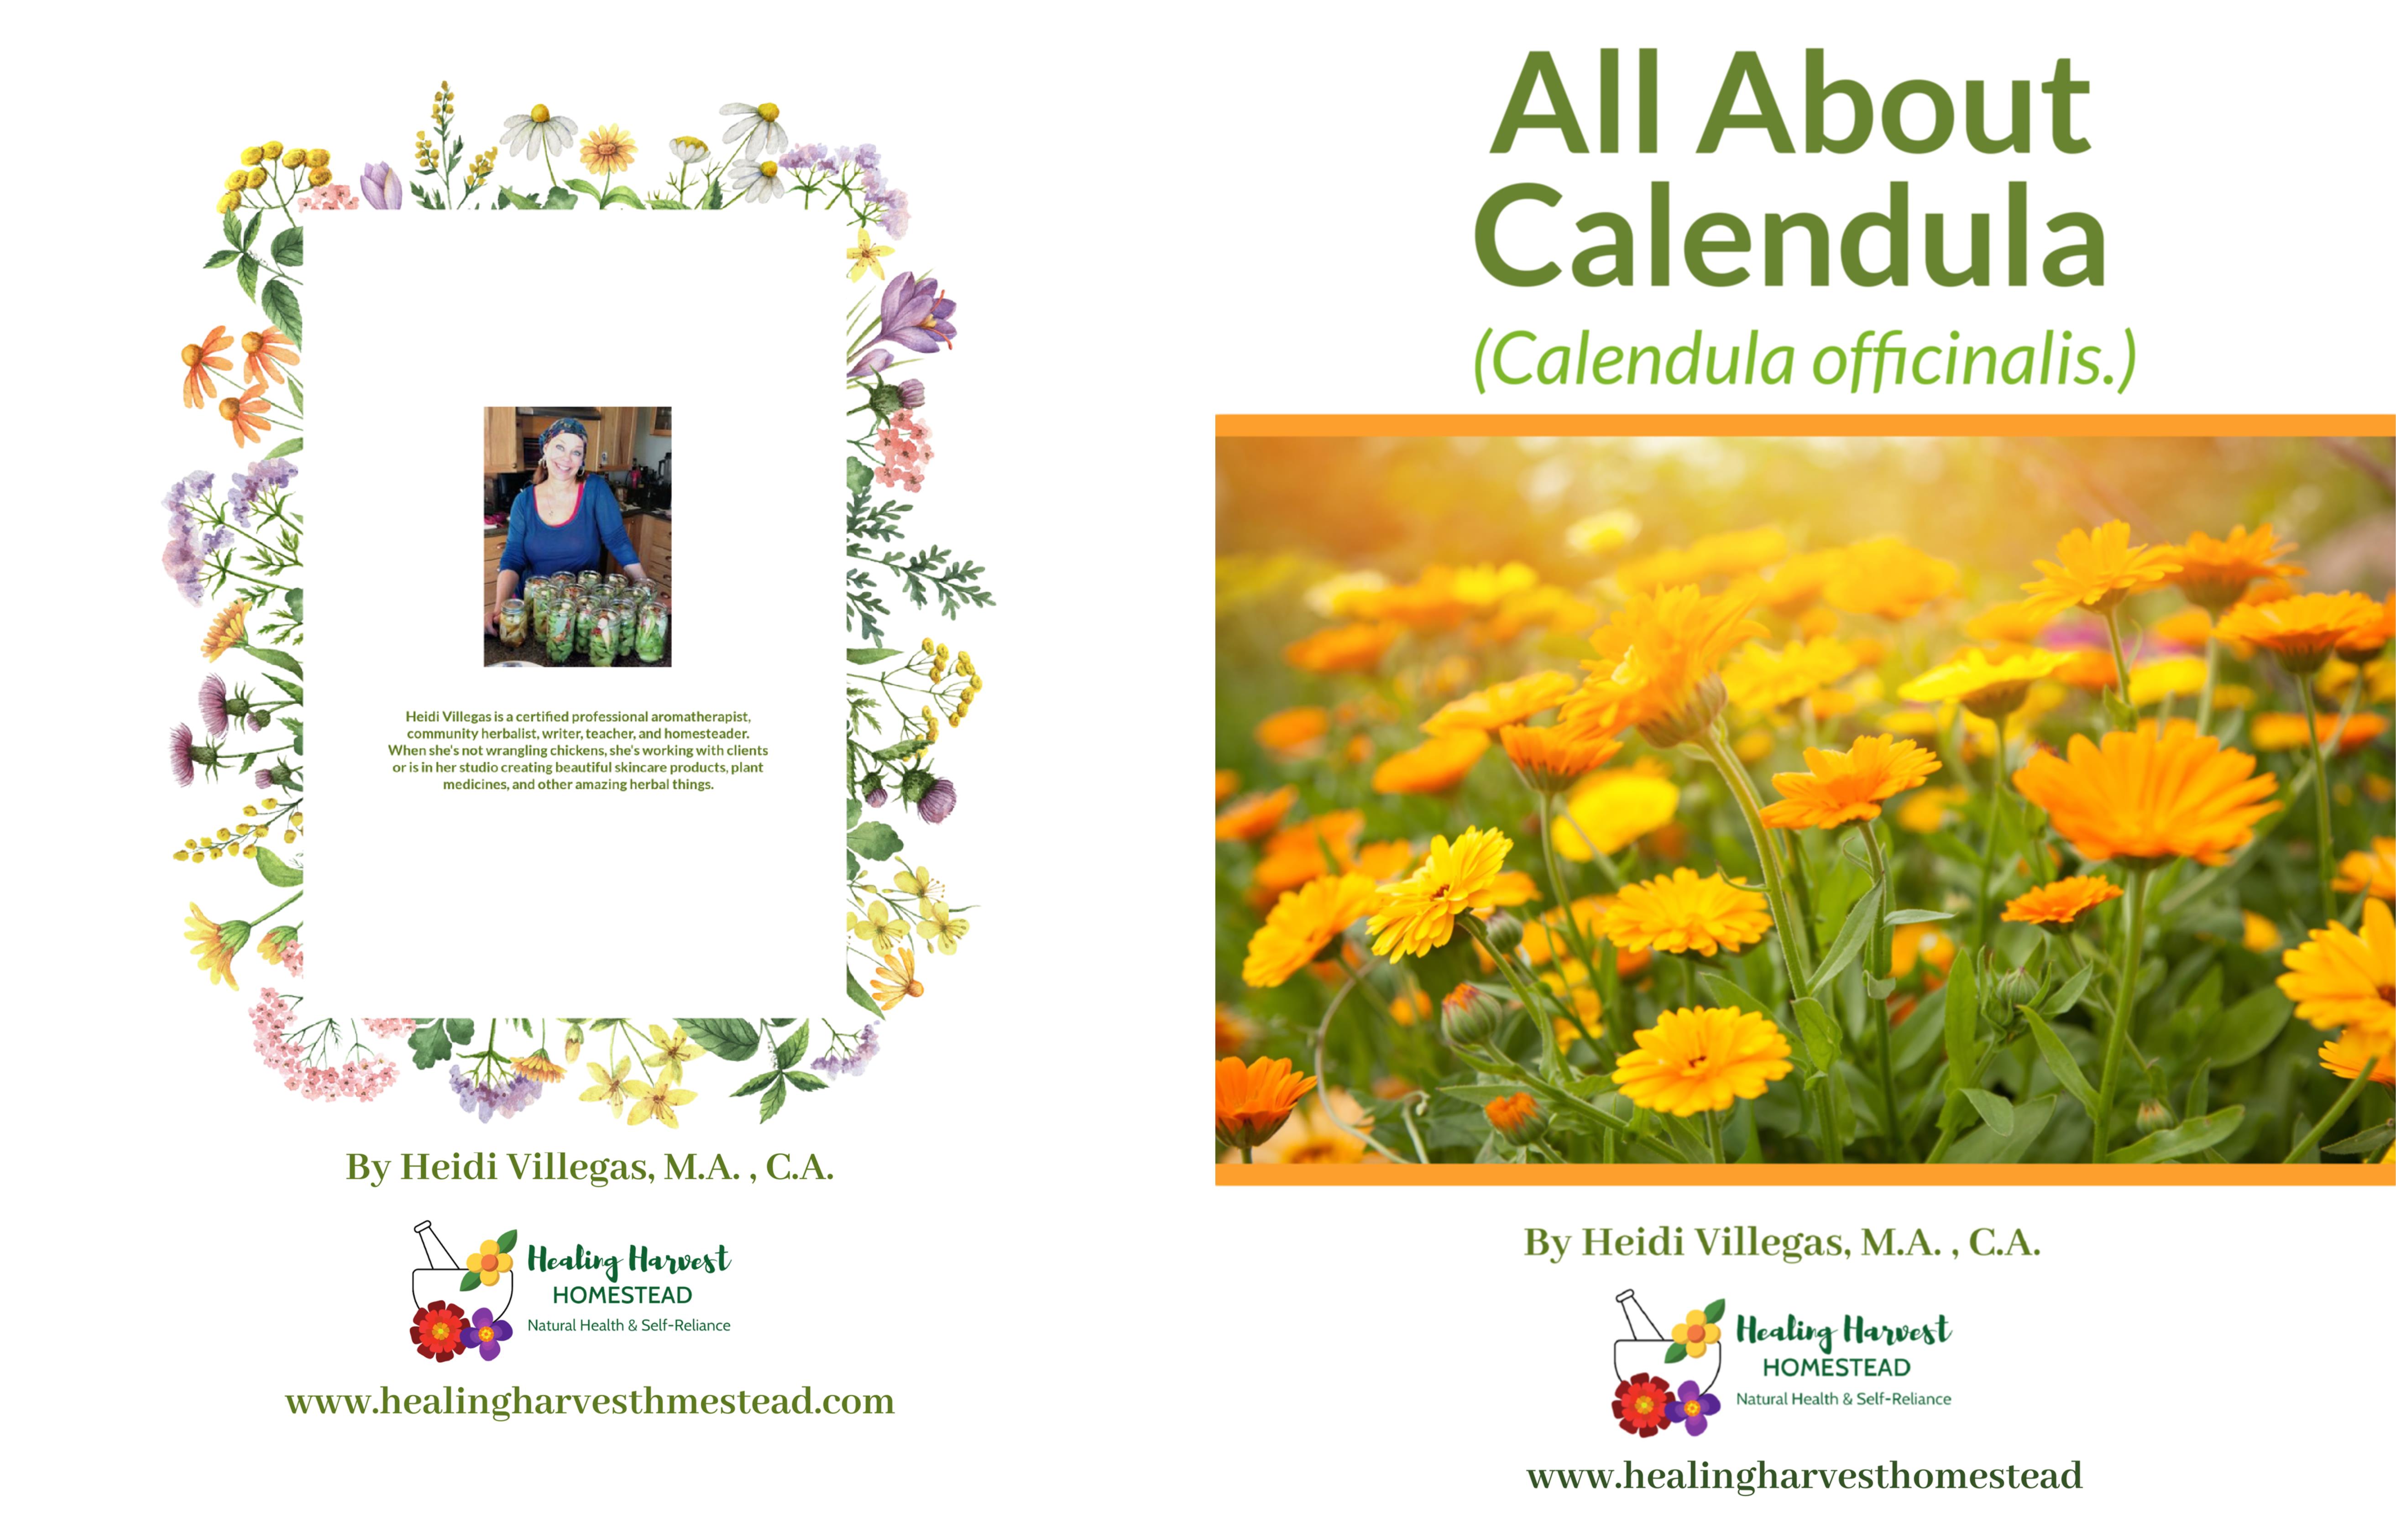 All About Calendula cover image